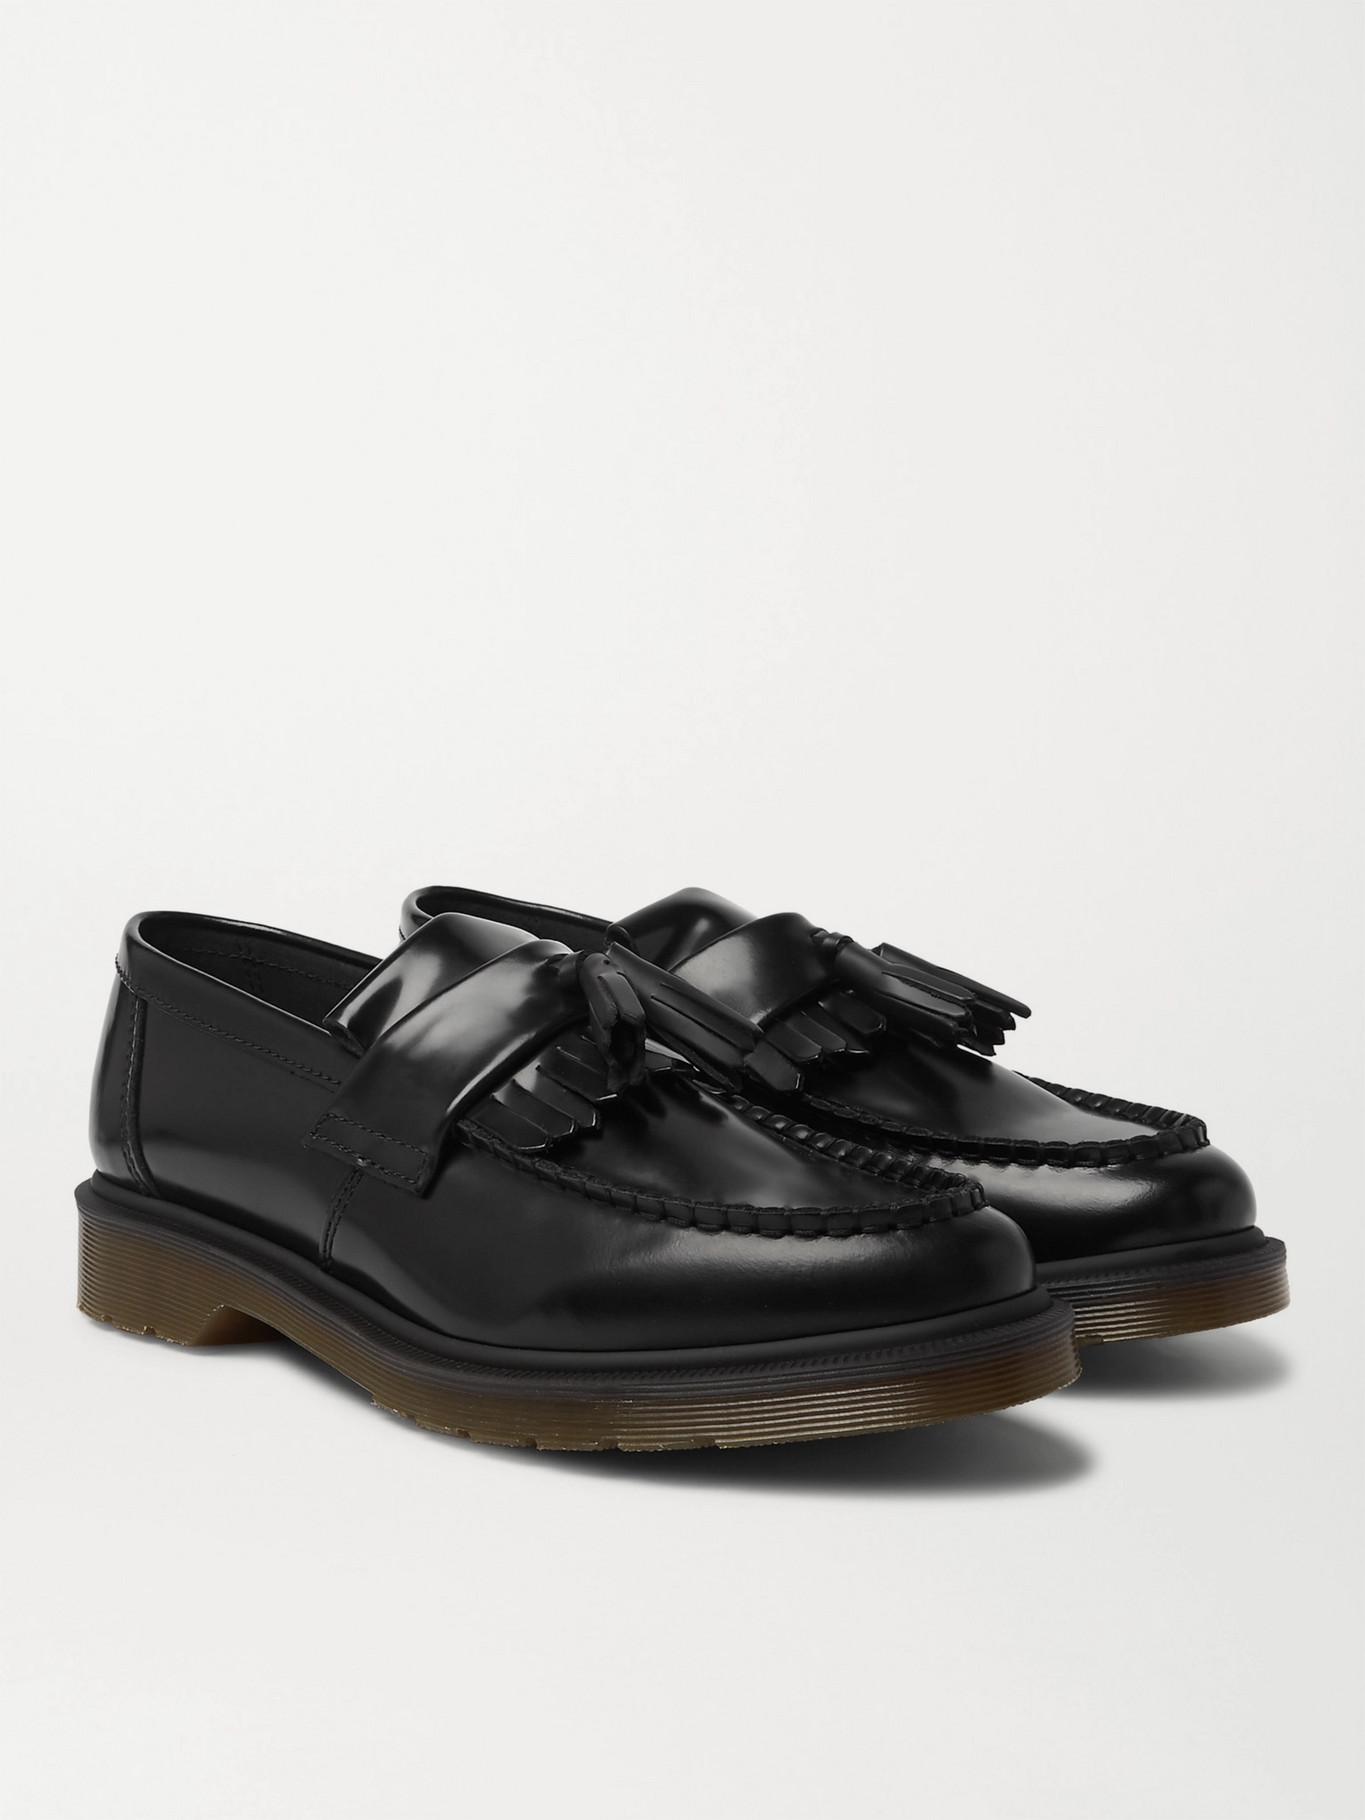 Dr. Martens Adrian Tassel Leather Loafers in Black for Men - Save 72% |  Lyst Canada